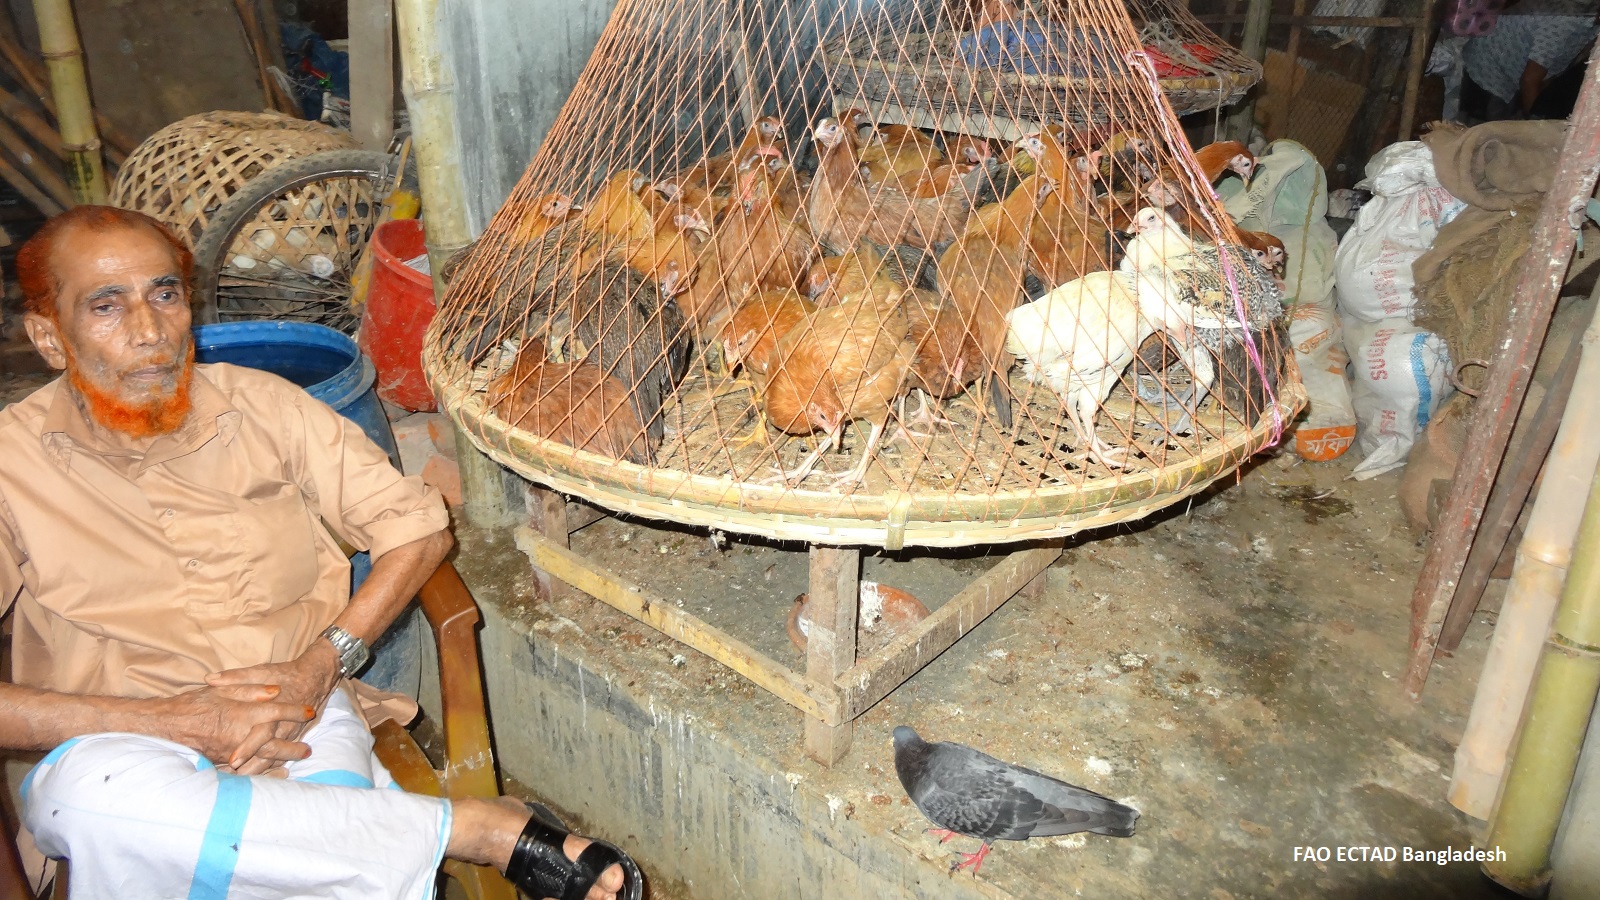 seated man with hennaed beard next to caged chickens in bird market setting